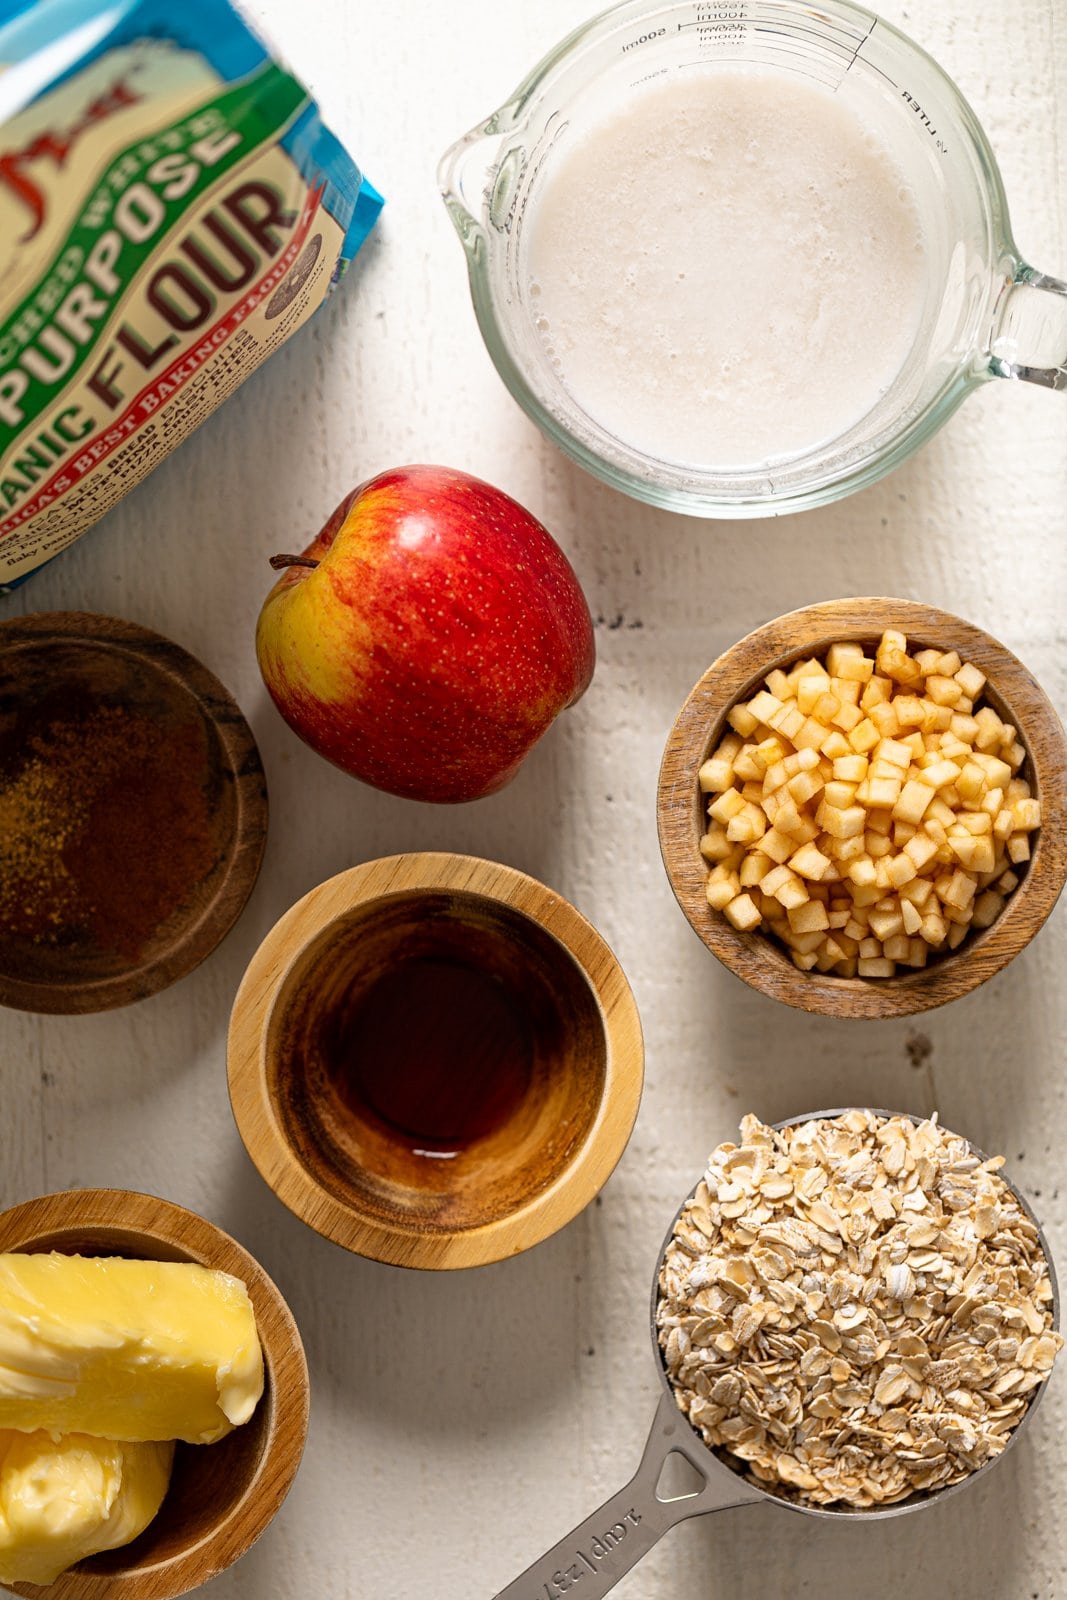 Ingredients for Vegan Apple Oatmeal Sheet Cake including organic flour, oats, and an apple